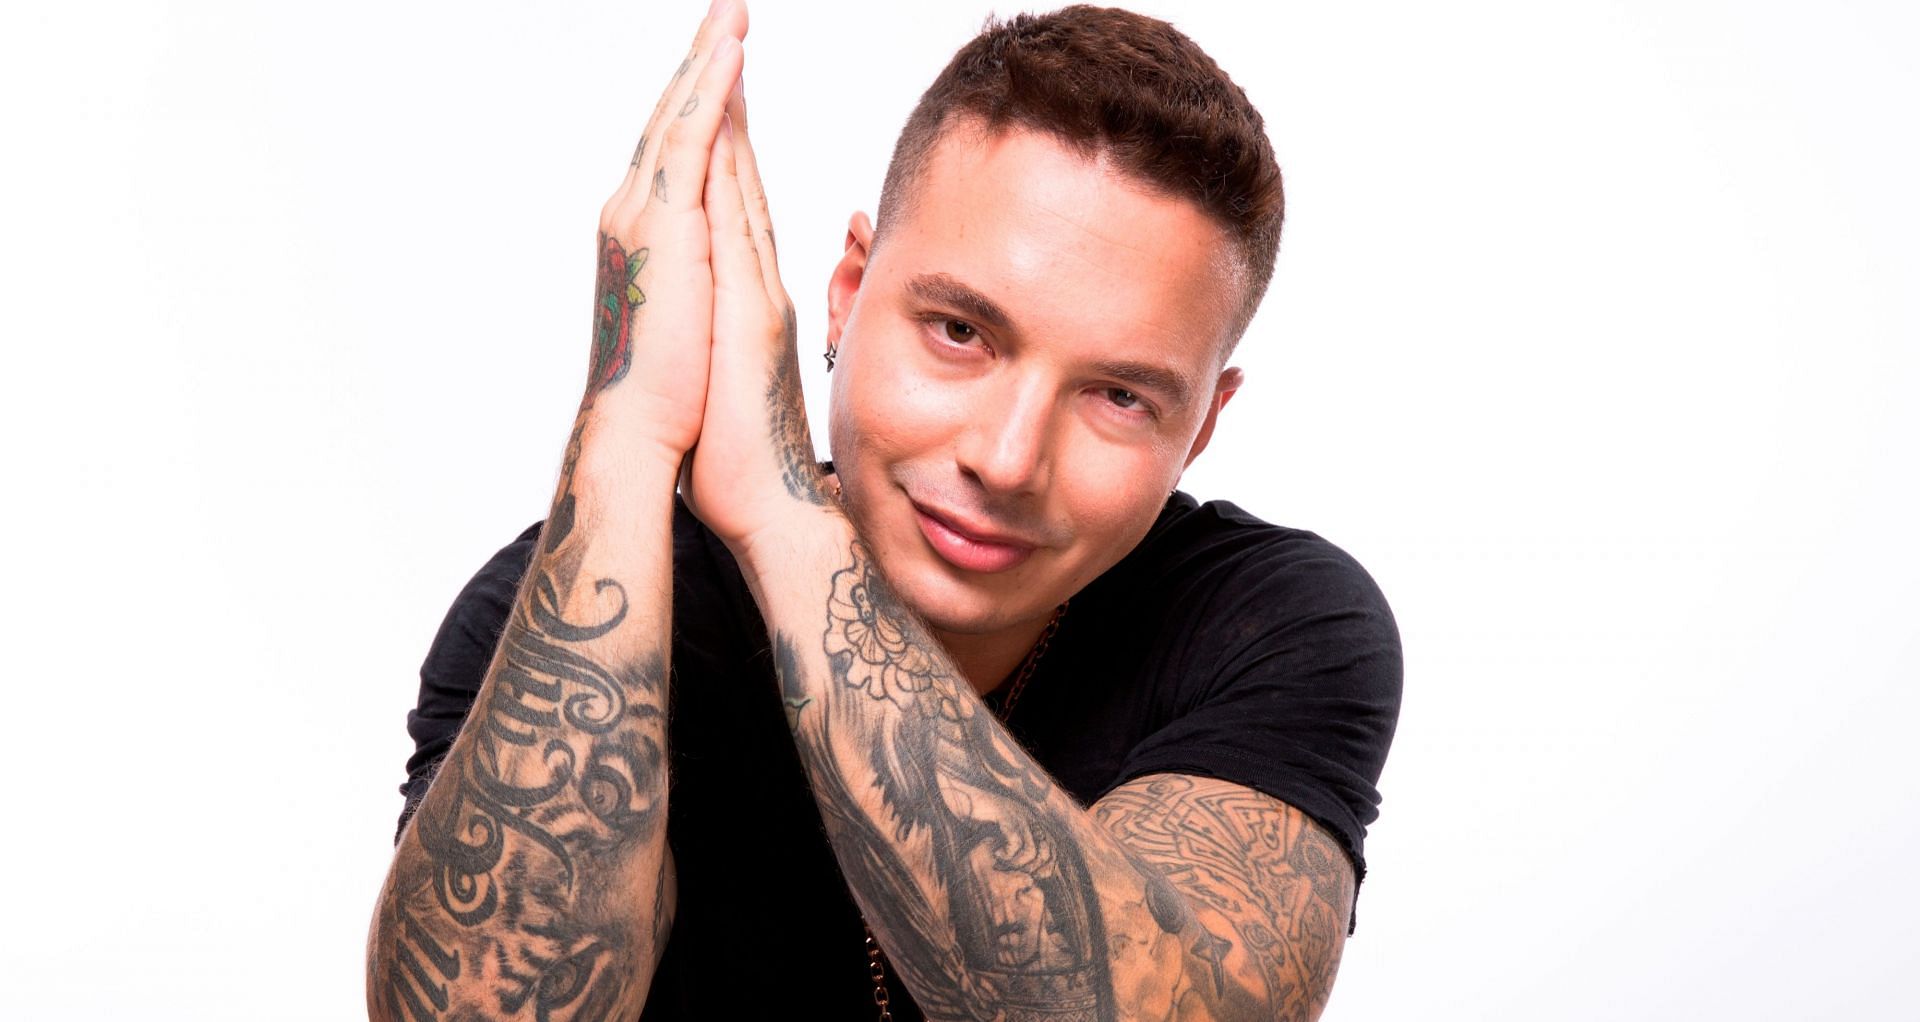 J Balvin apologizes for 'Perra' music video: 'That's not who I am' 